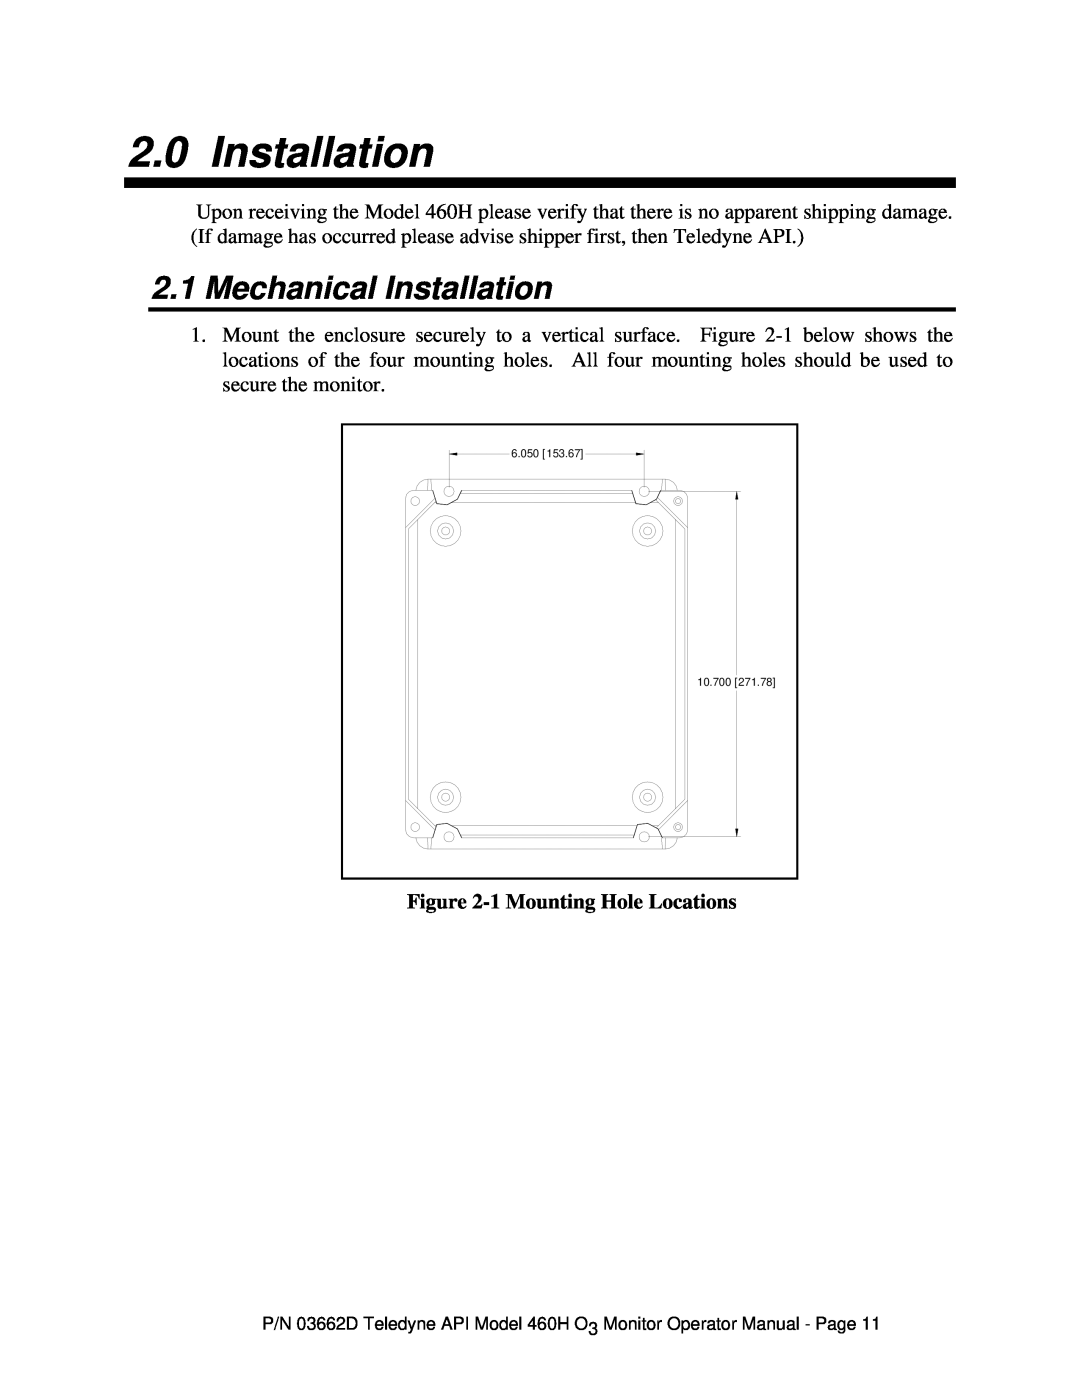 Teledyne 460H instruction manual Mechanical Installation, 1 Mounting Hole Locations 